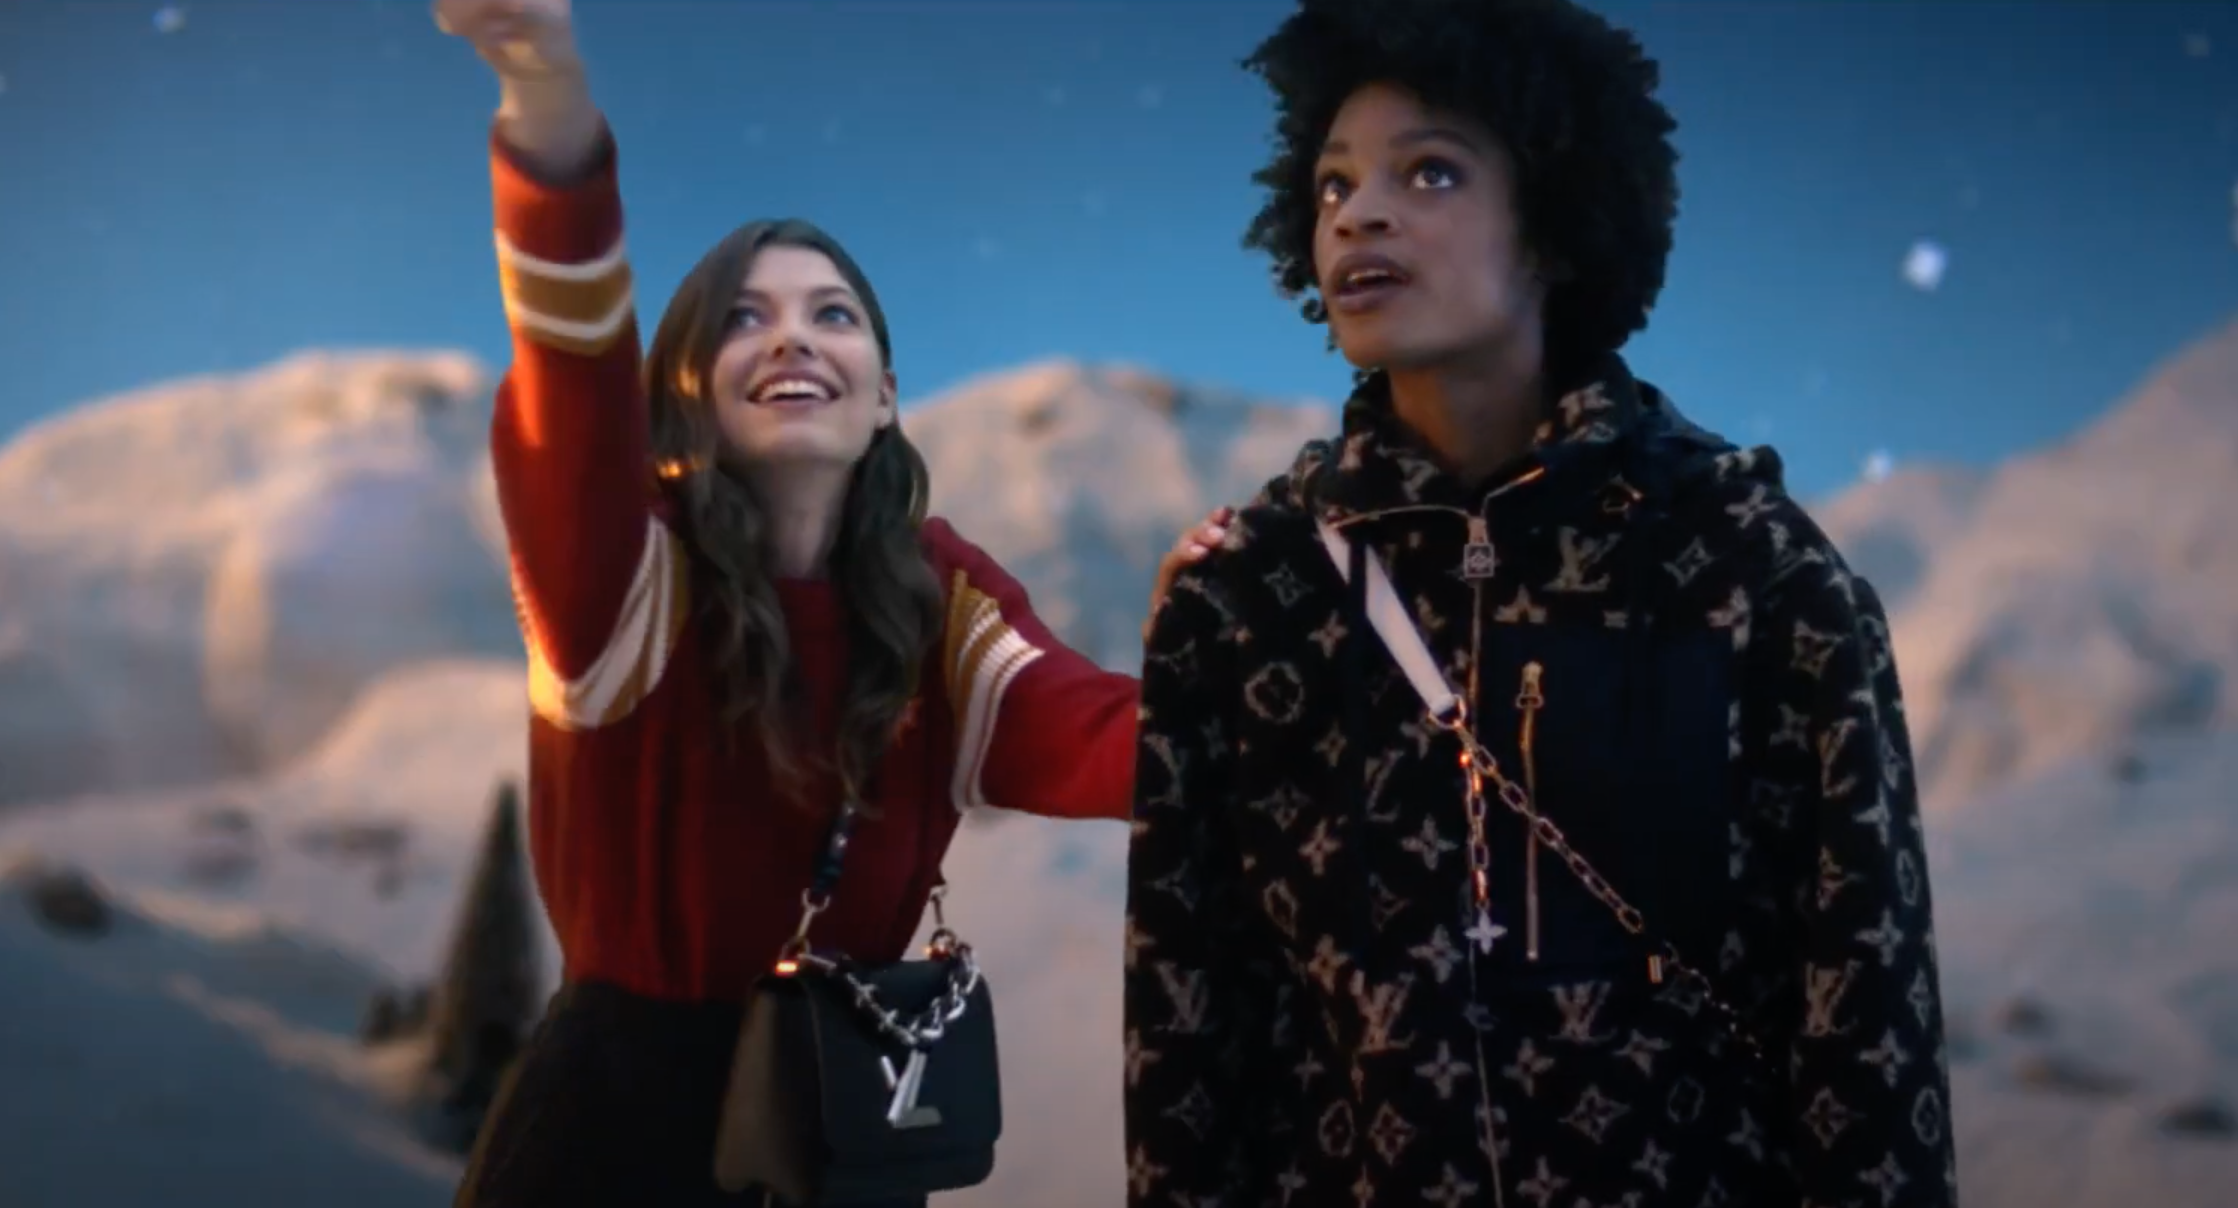 Louis Vuitton's 2022 Holiday Campaign is a Romantic Comedy Featuring Two  Iconic Characters